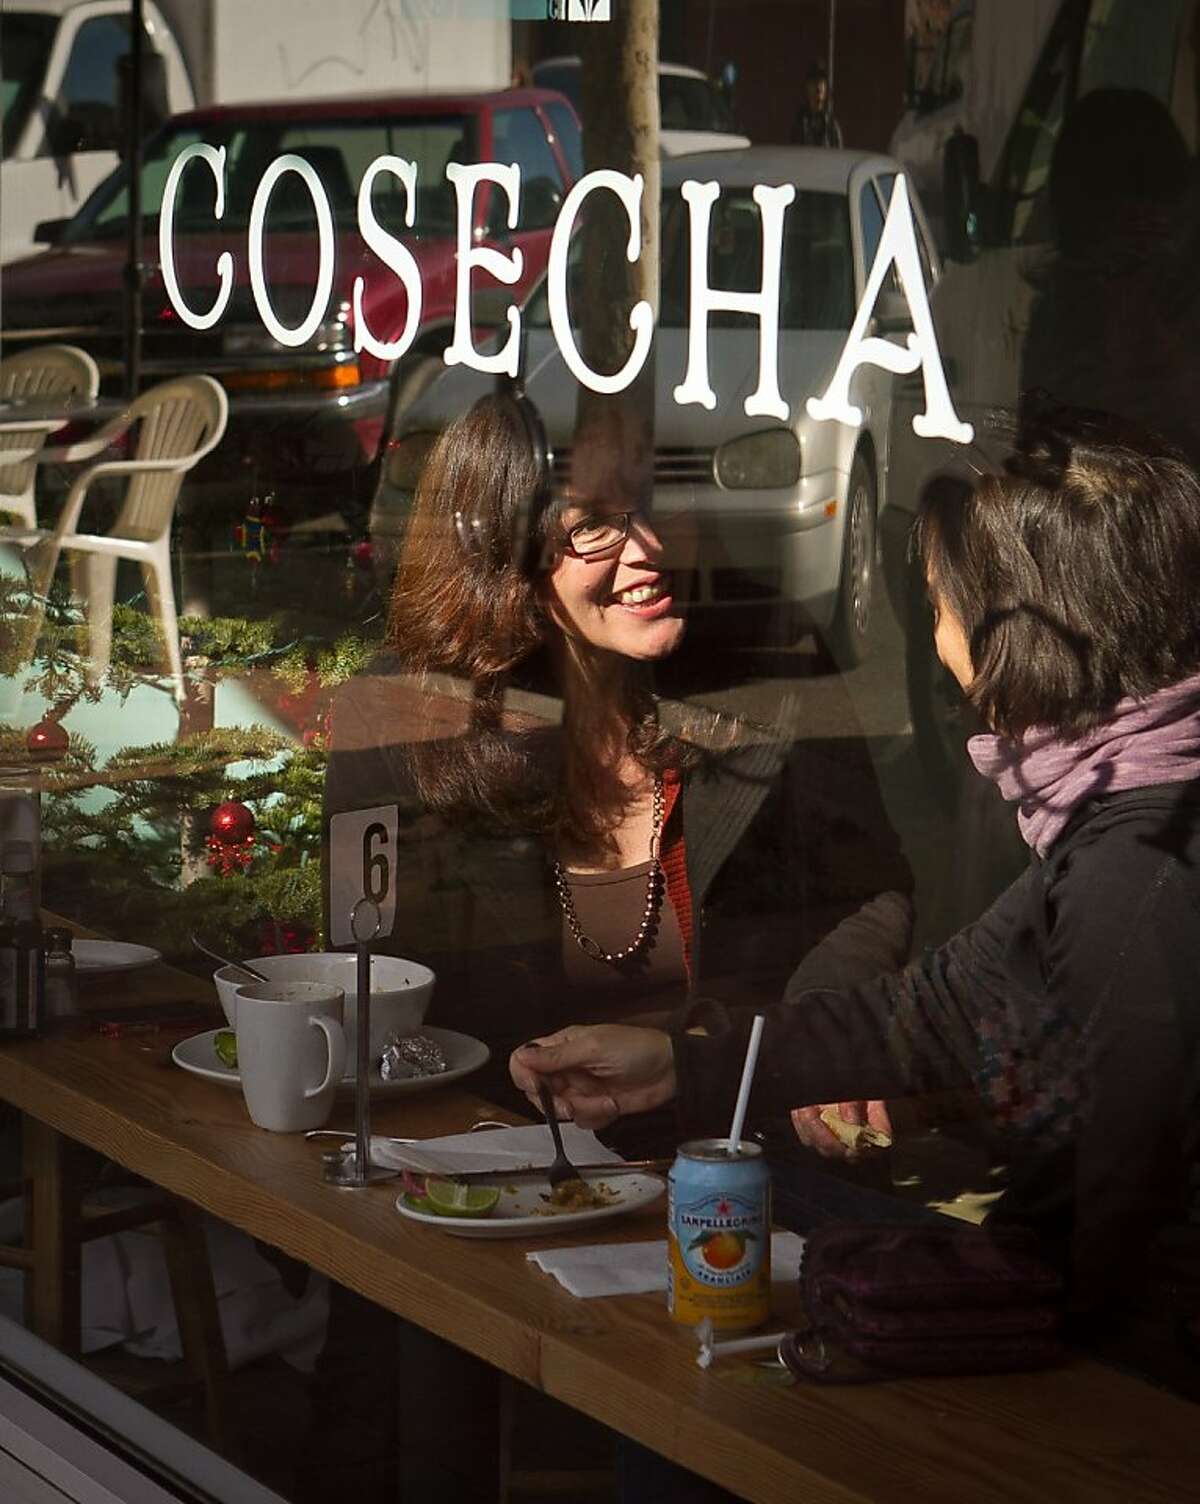 Diners enjoy lunch at Cosecha Restaurant in Oakland, Calif., on Friday, January 6th, 2012.